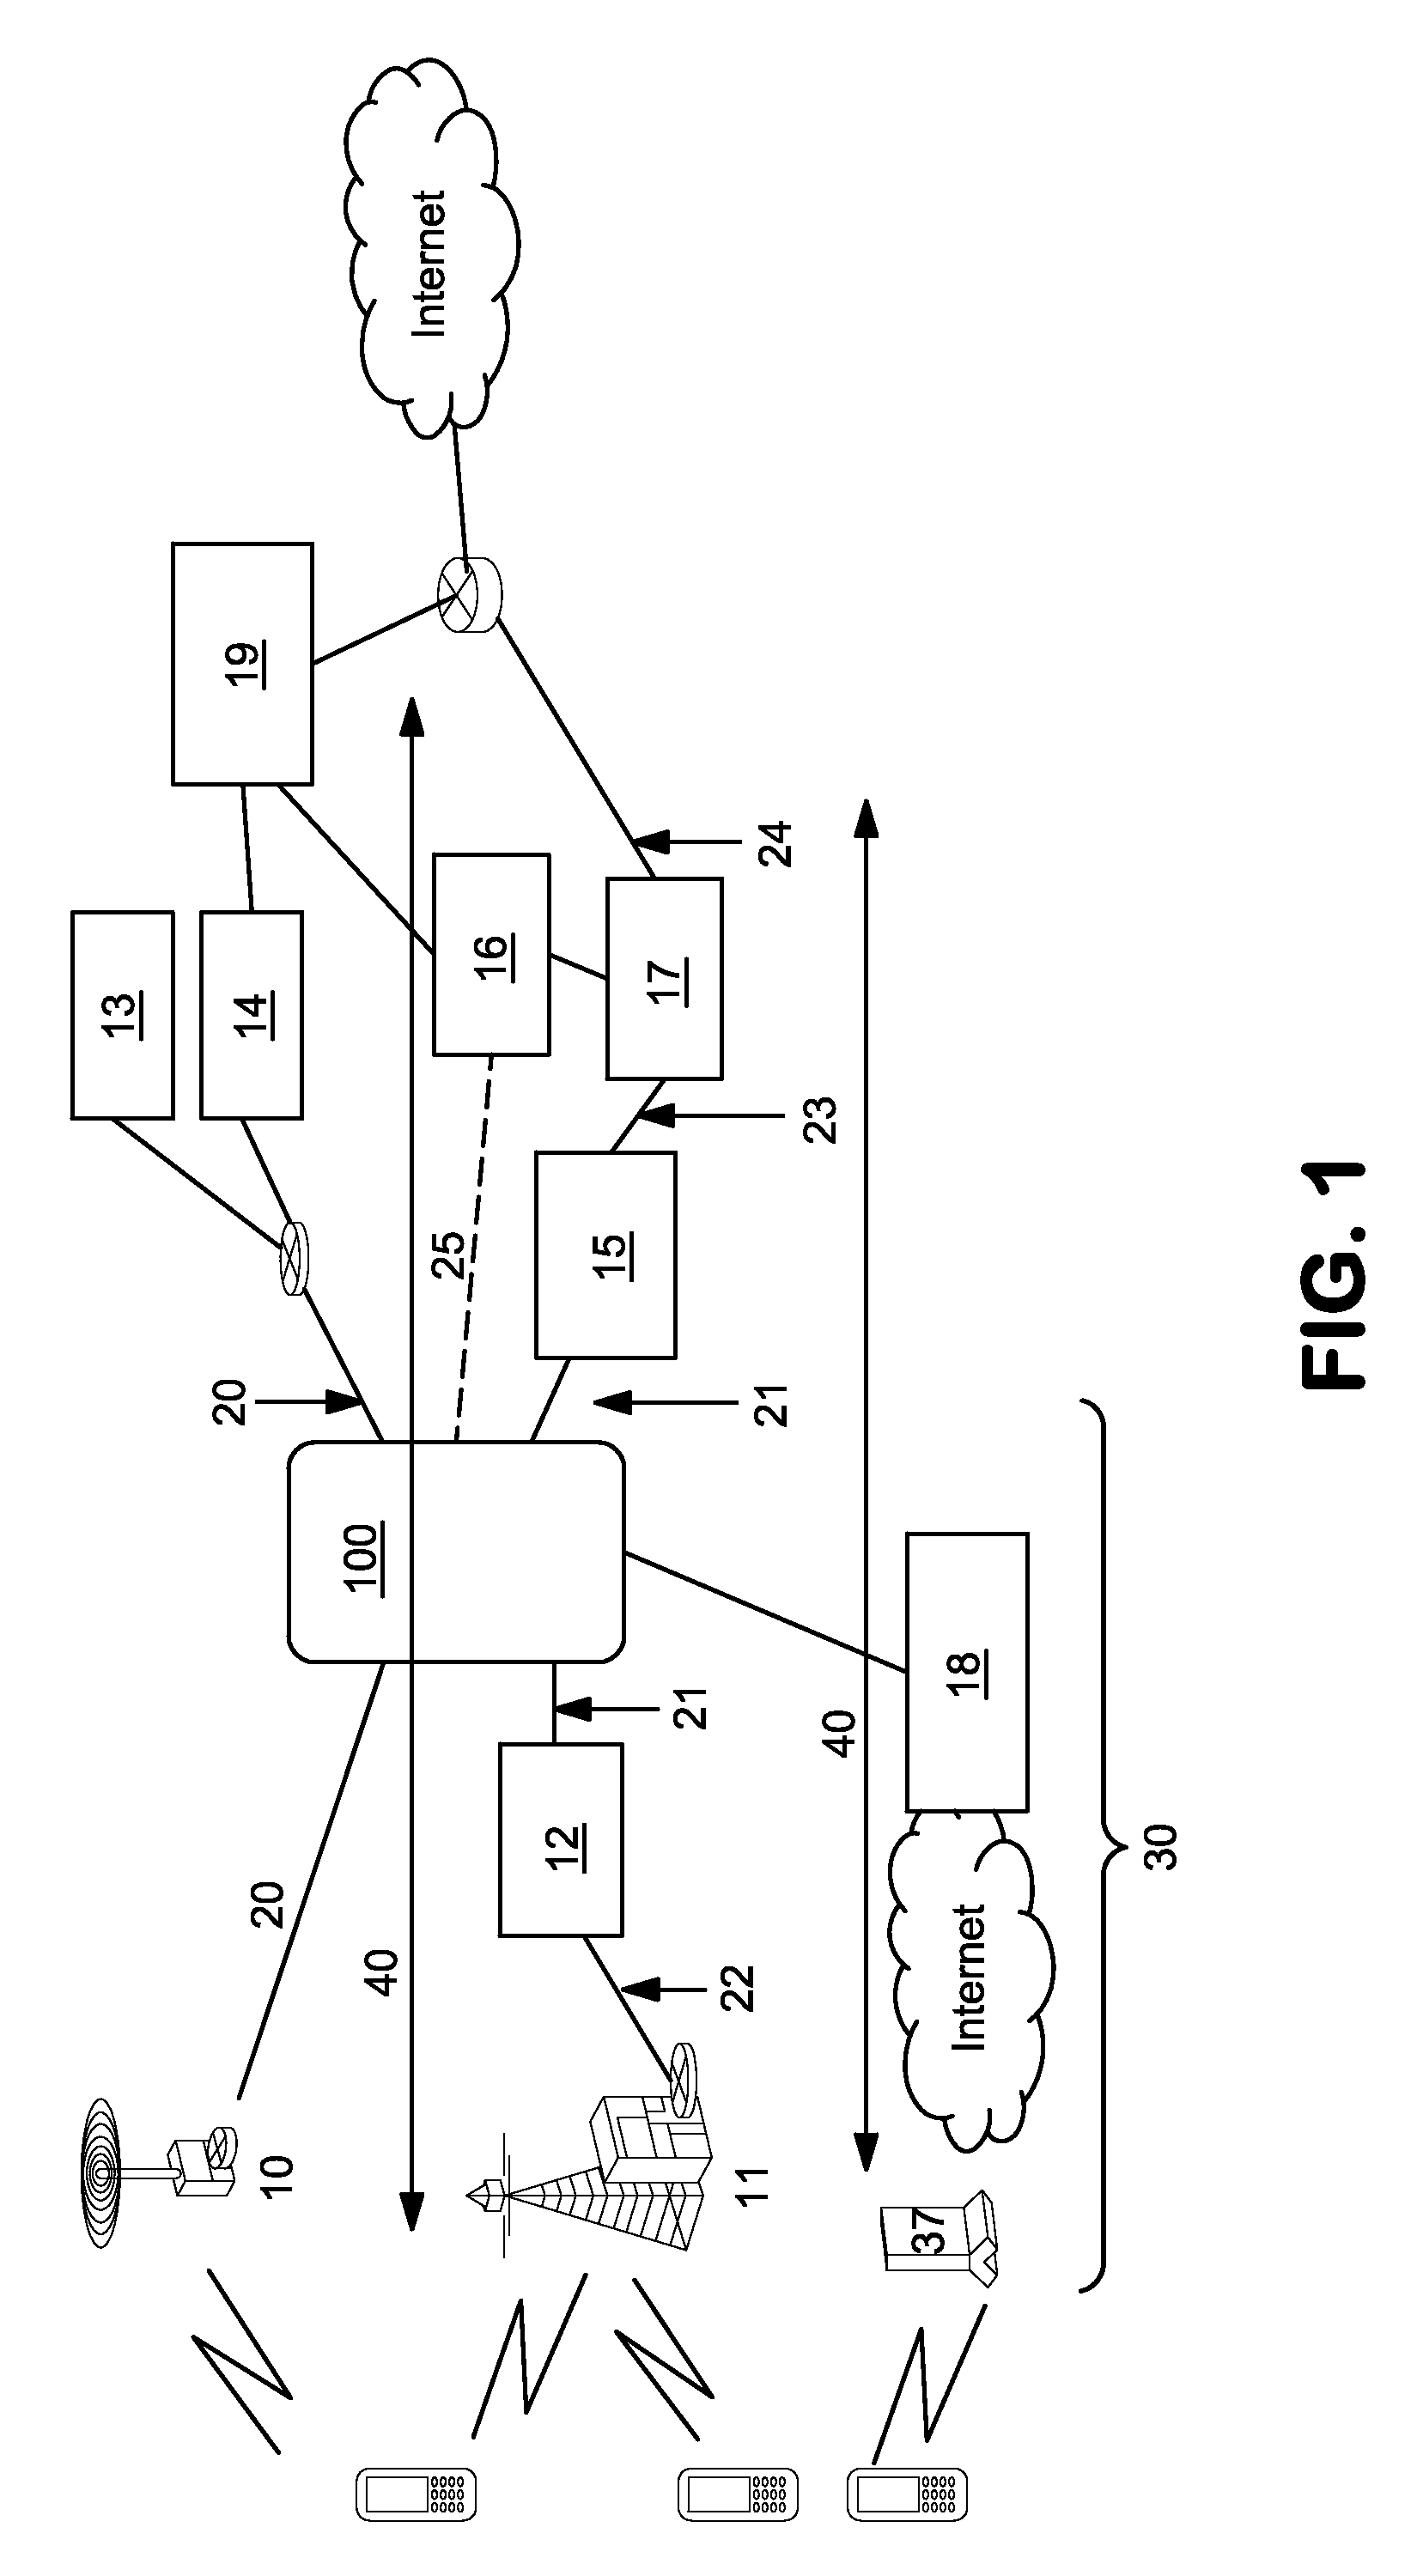 Content and RAN aware network selection in multiple wireless access and small-cell overlay wireless access networks